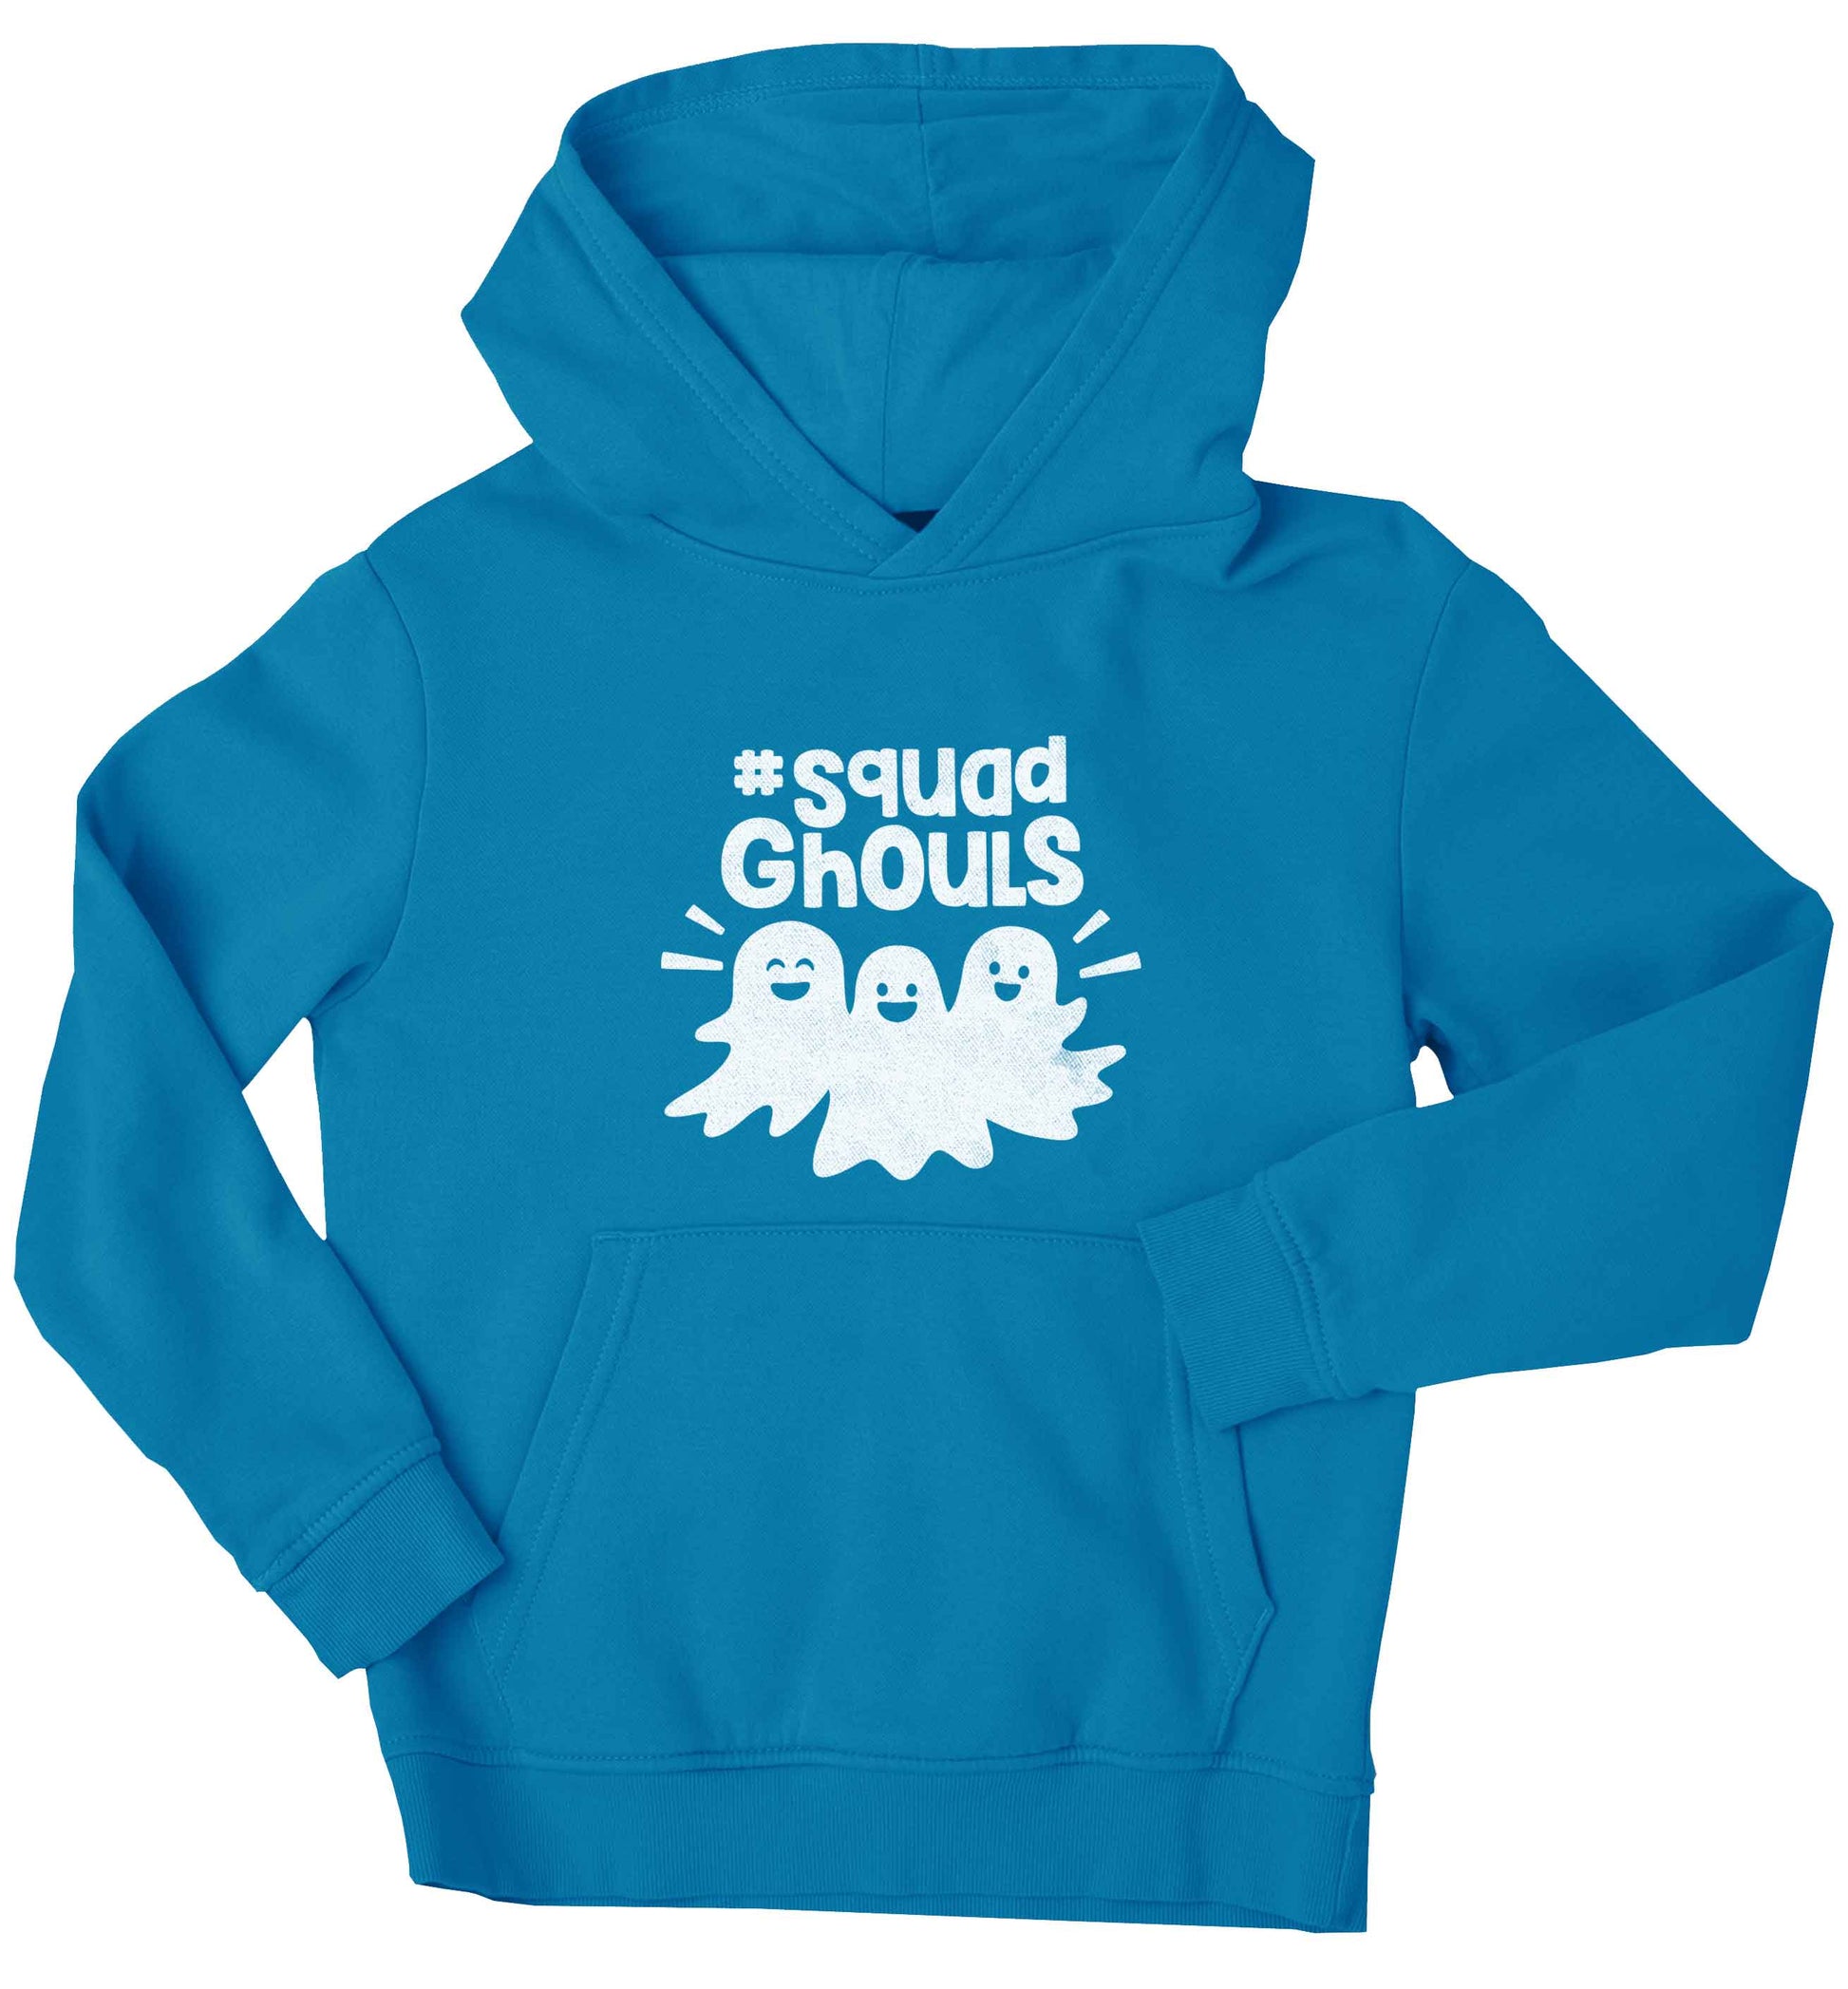 Squad ghouls Kit children's blue hoodie 12-13 Years